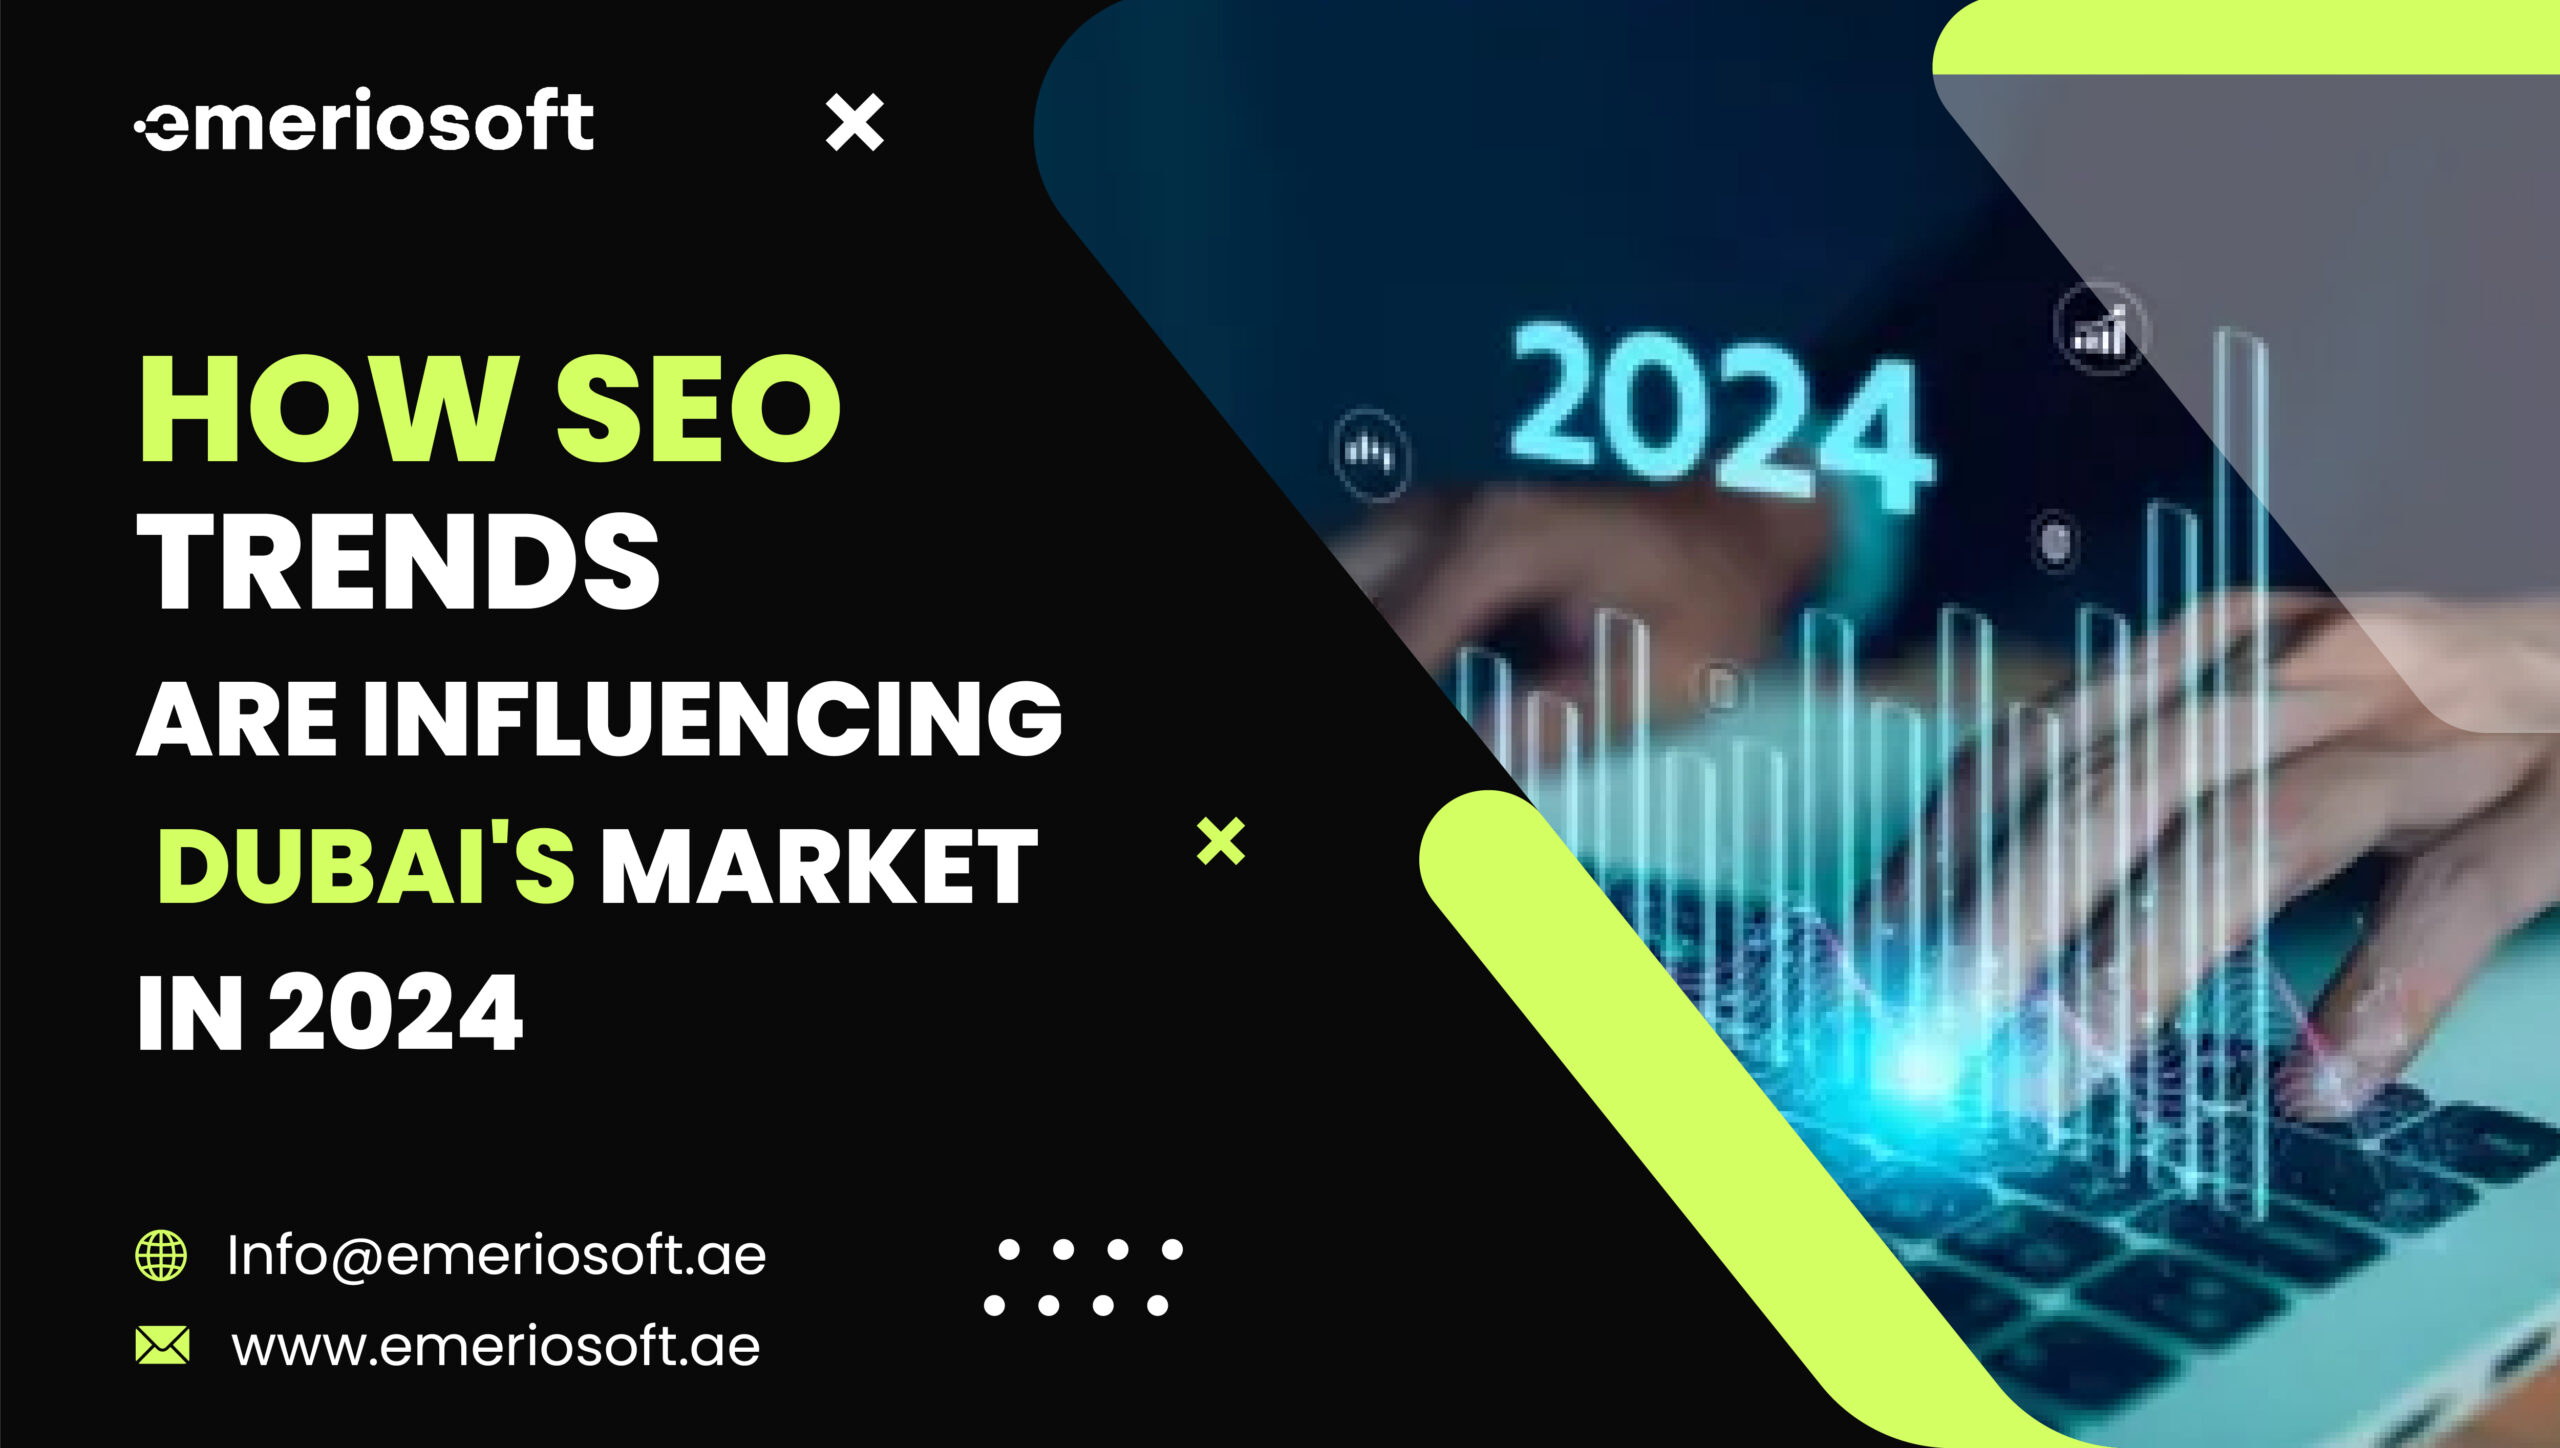 How SEO Trends Are Influencing Dubai's Market In 2024